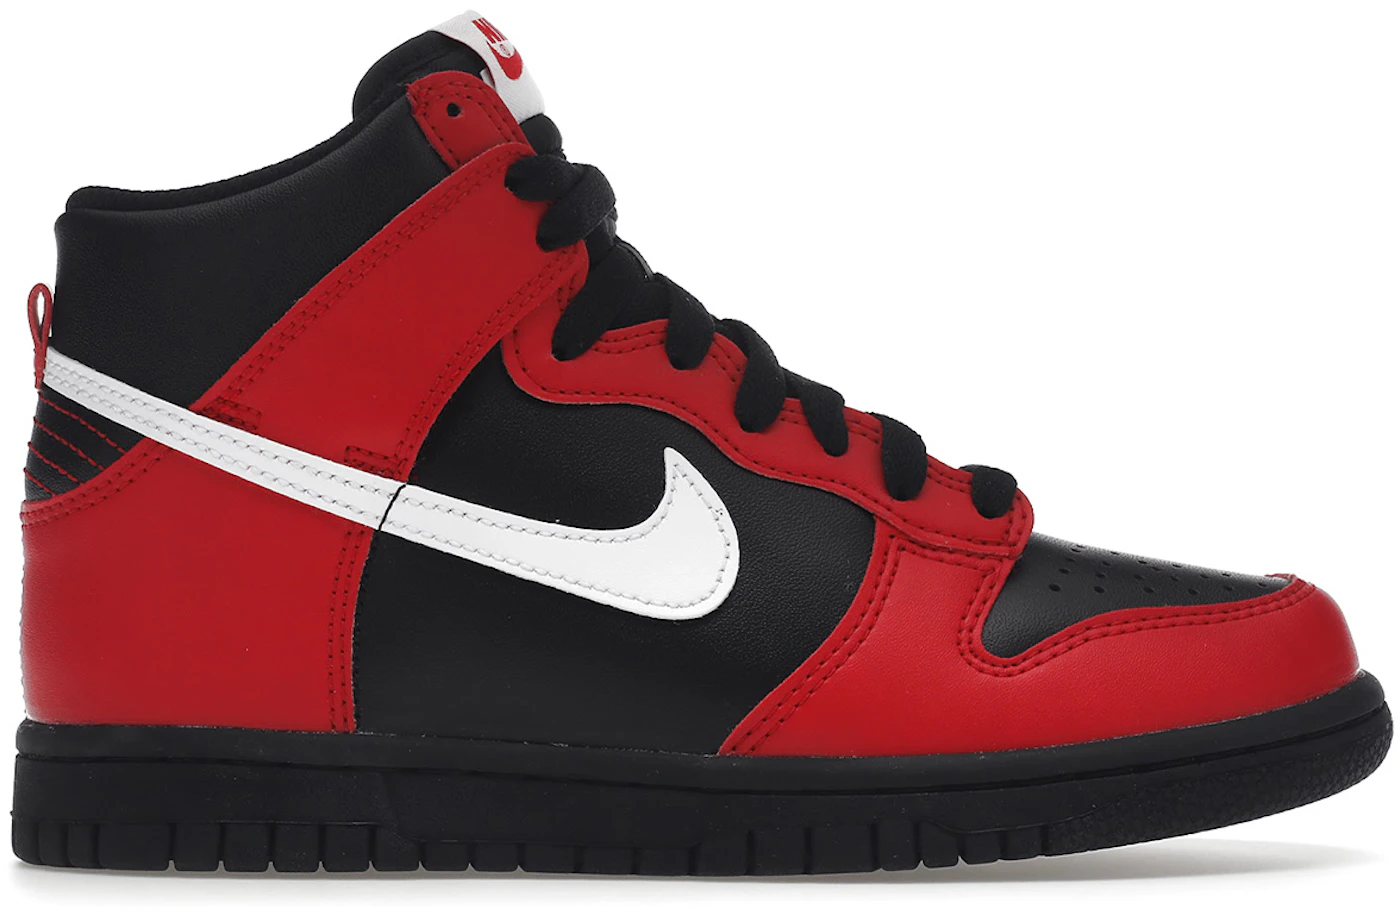 This Nike Dunk High Gives Off 'Deadpool' Vibes - Sneaker Freaker